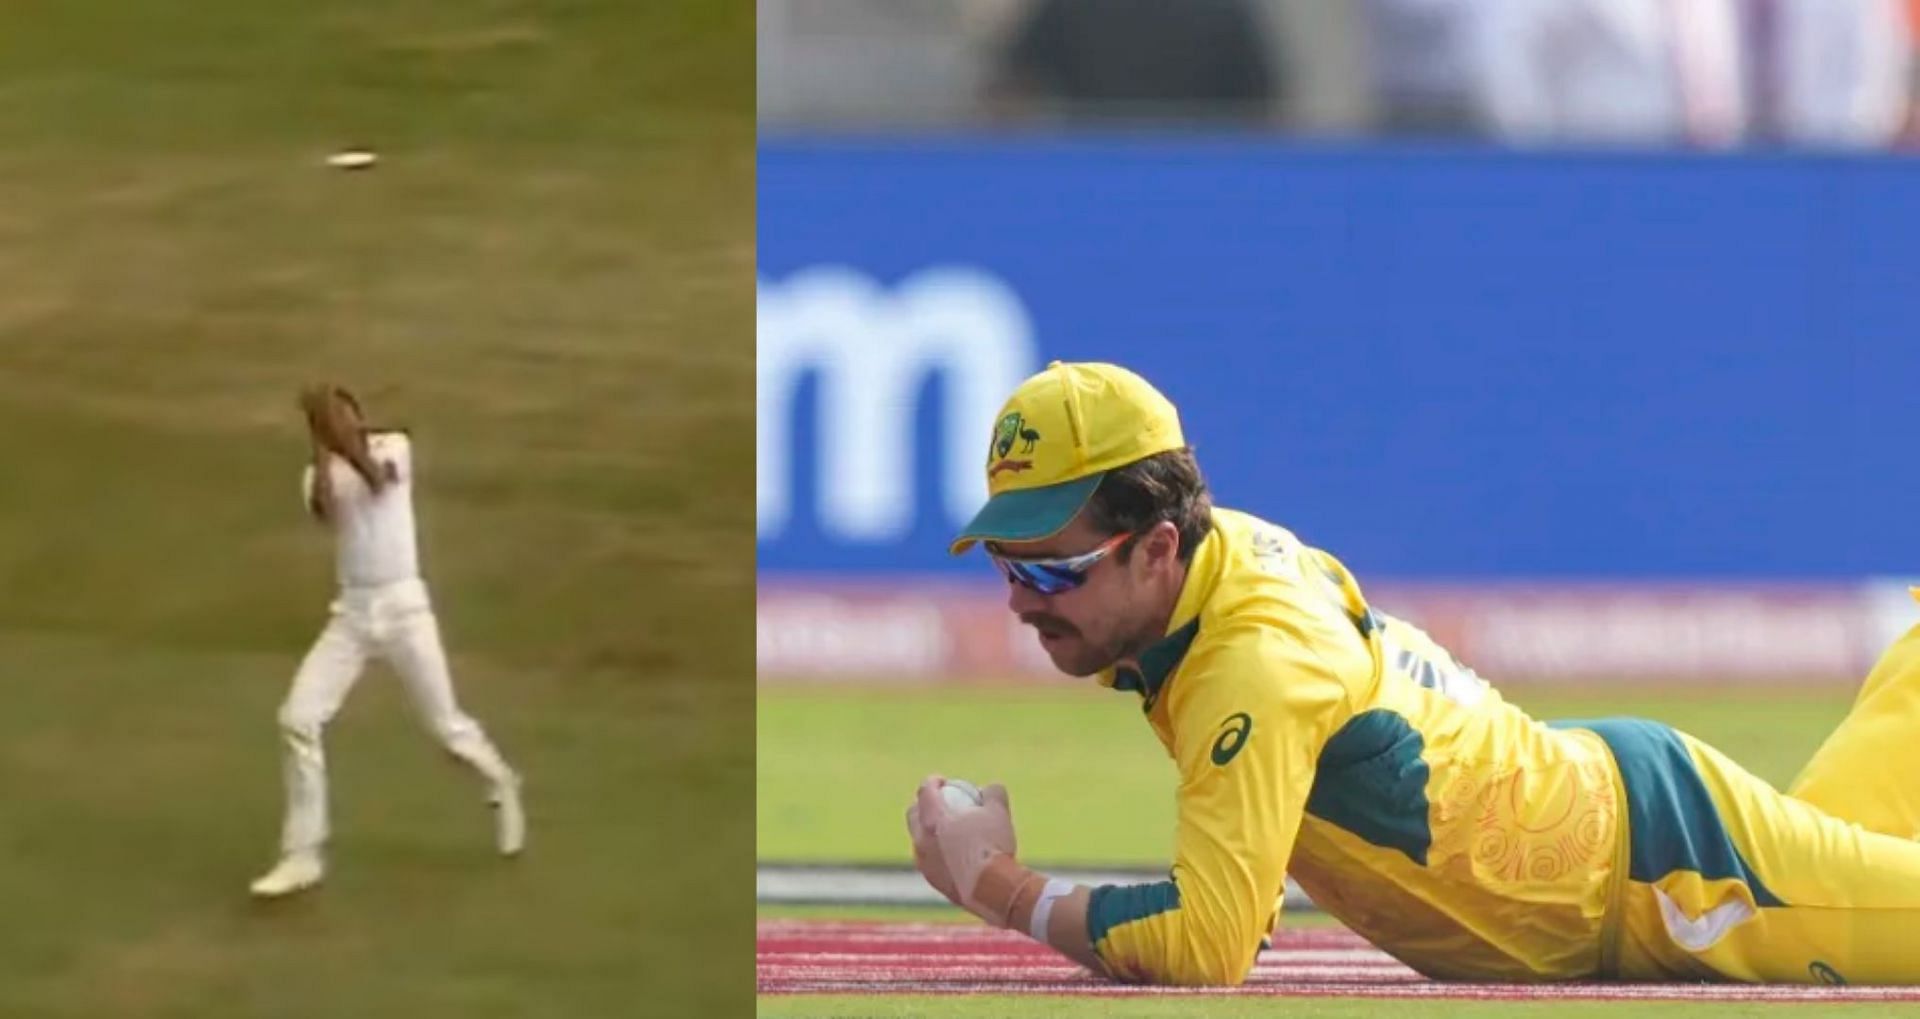 Several World Cup finals have turned on their heads thanks to brilliant catches